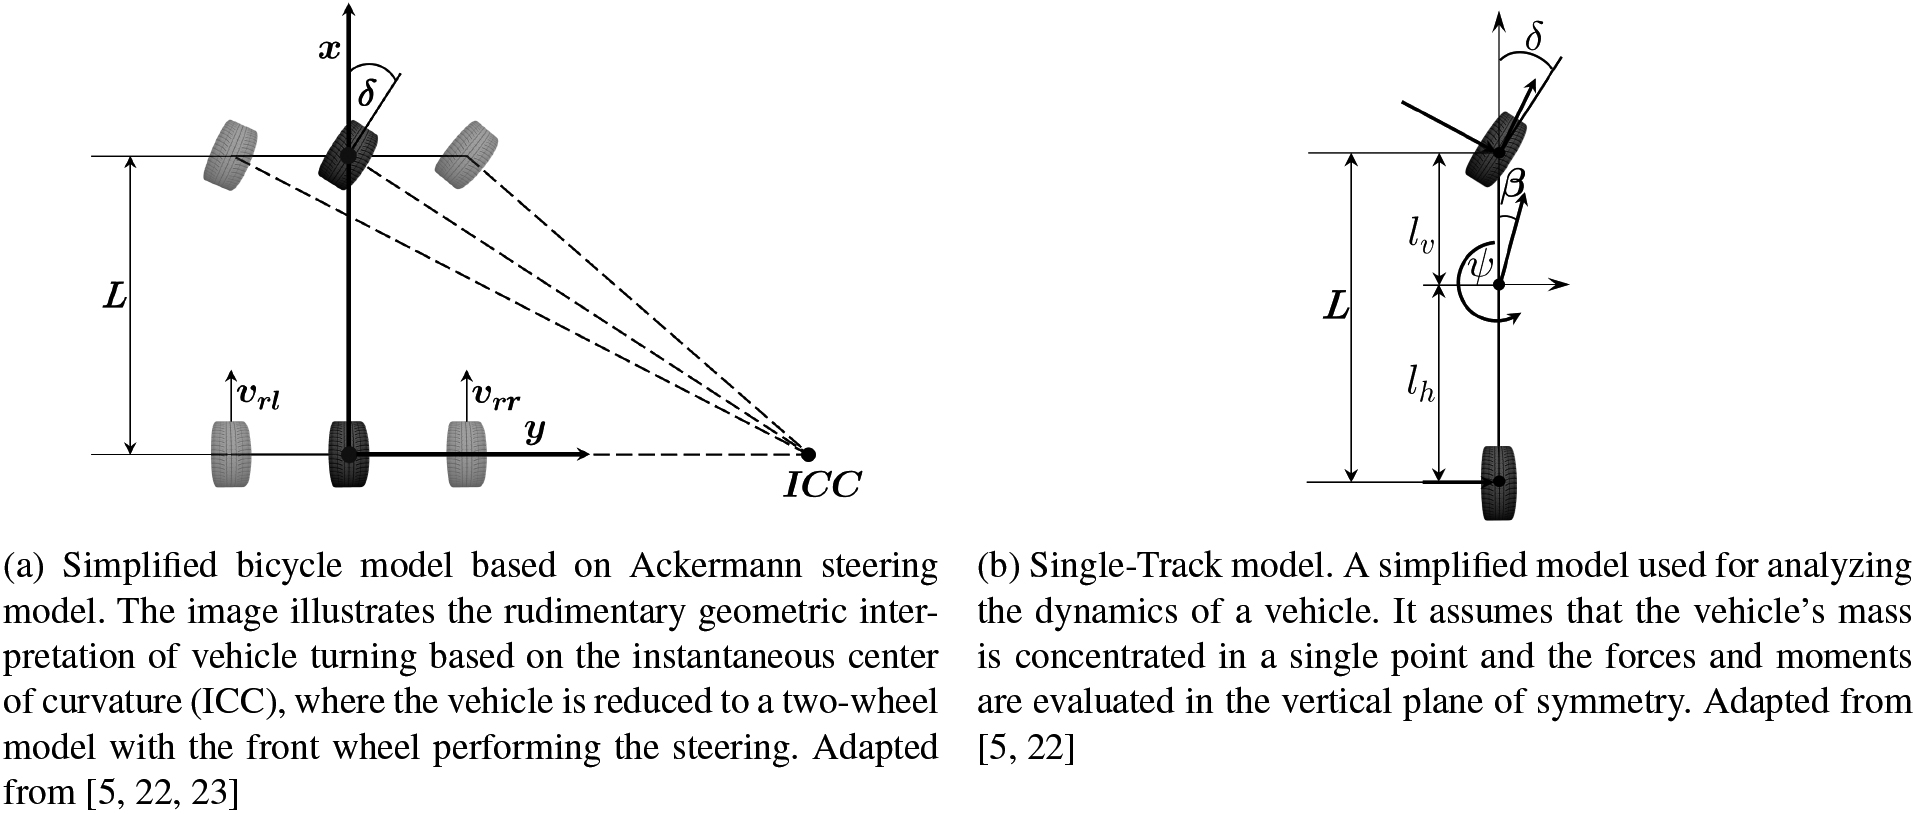 Comparison between the Ackermann steering model and single-track model.